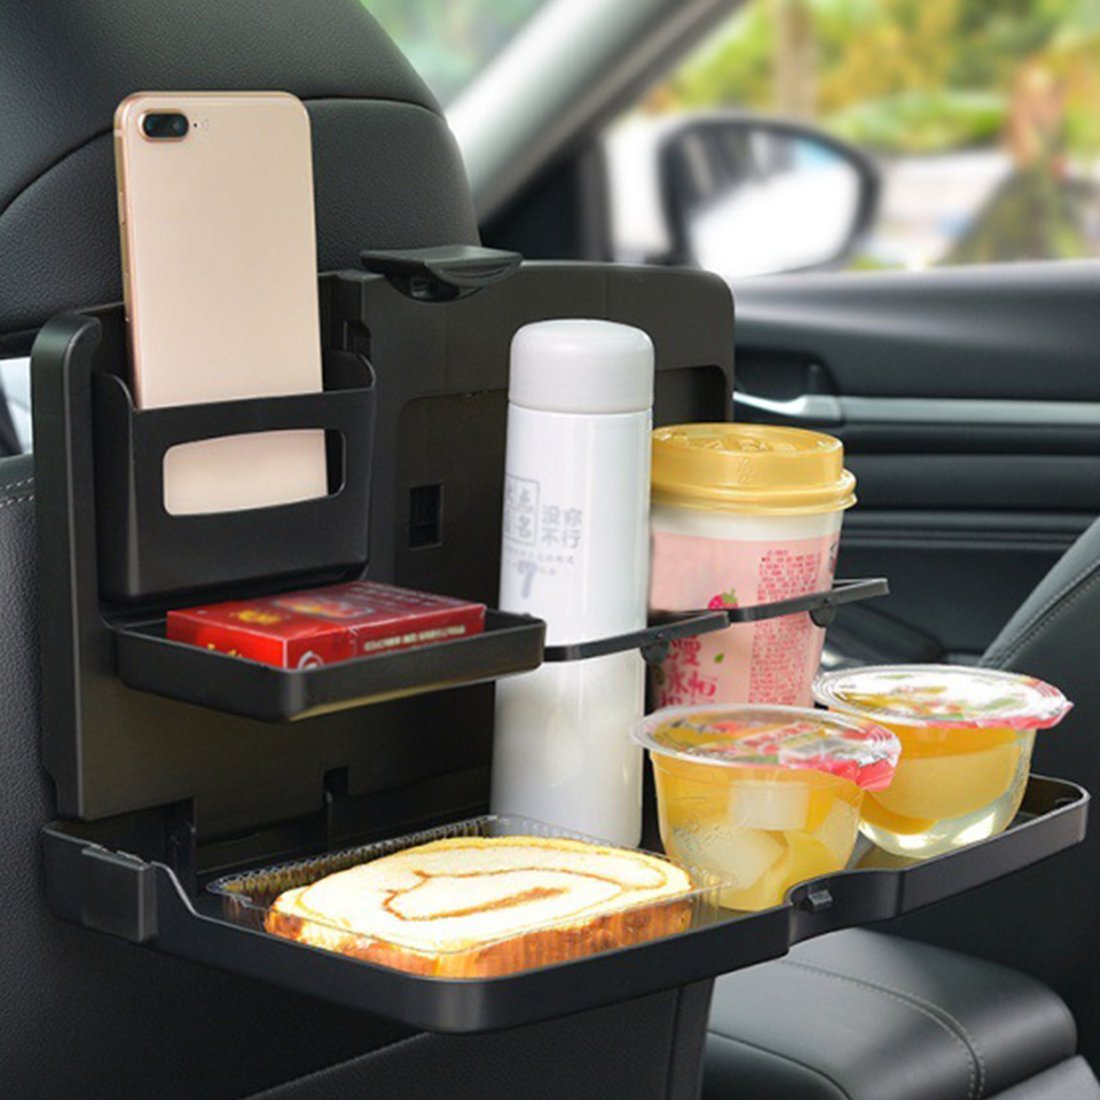 Car Folding Table of Back Seat - Home Essentials Store Retail